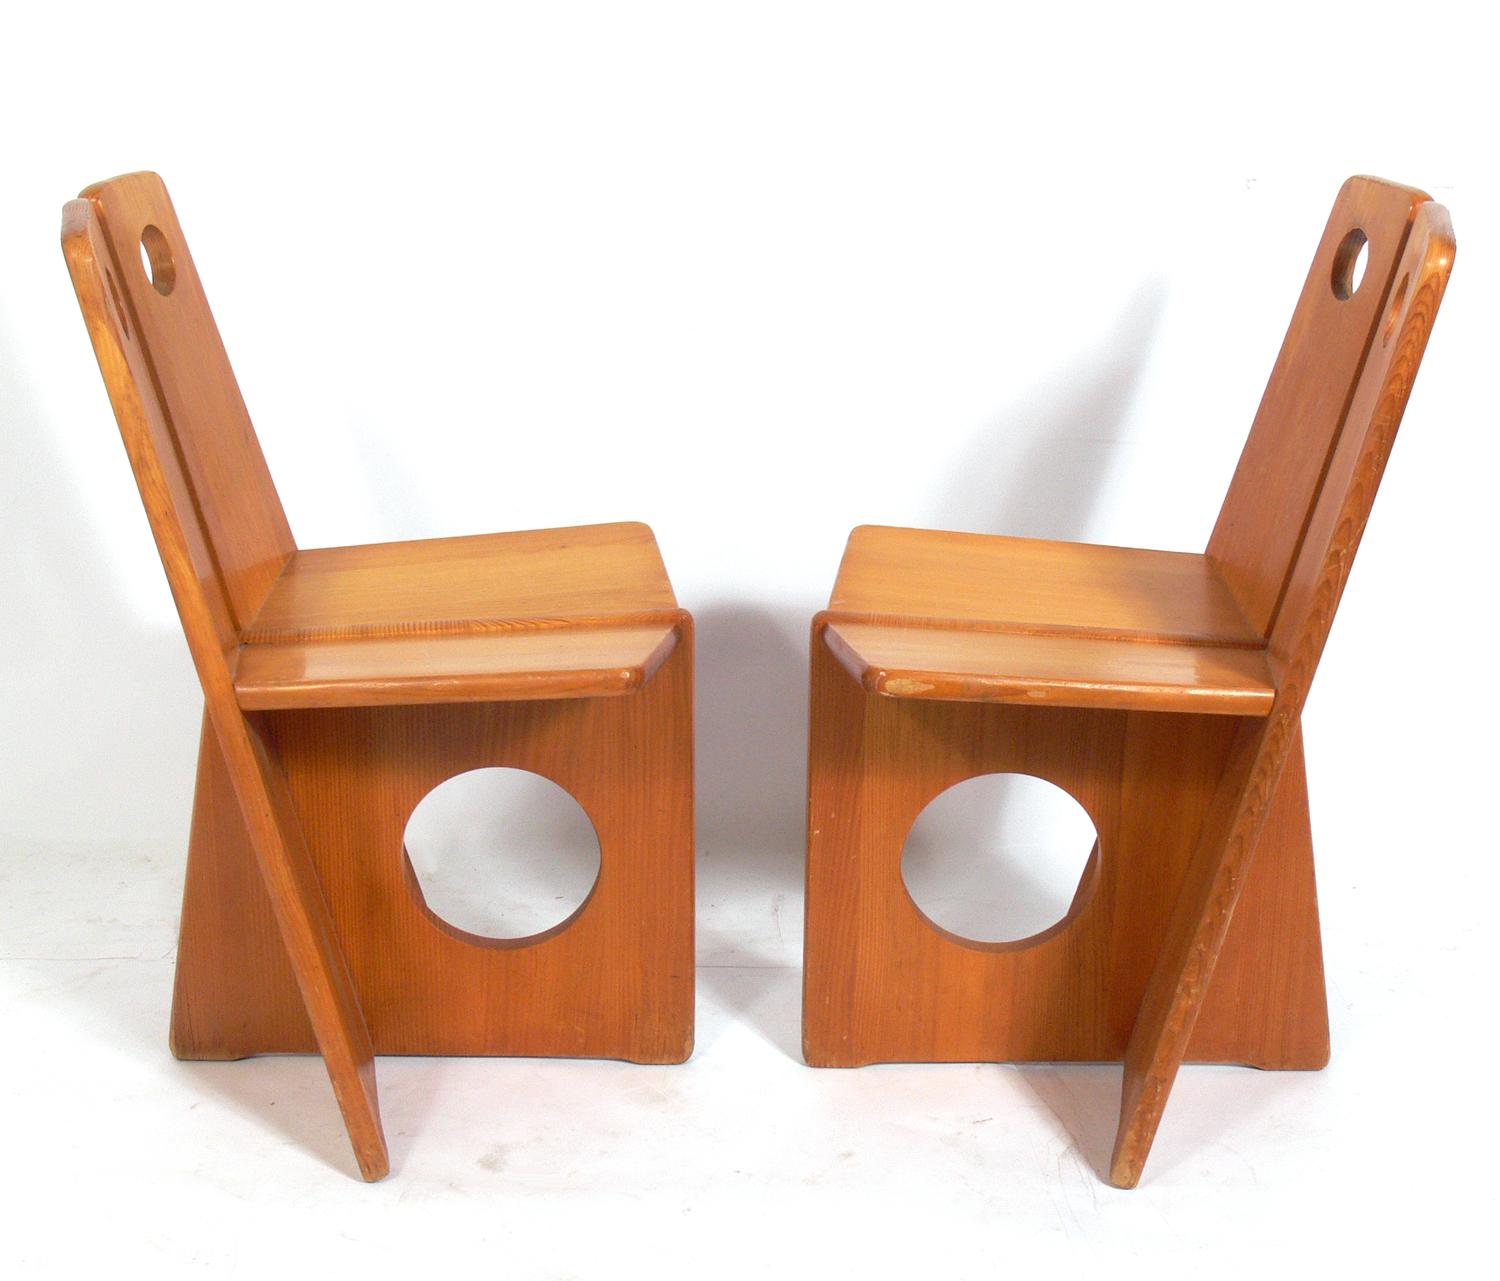 Pair of Low Slung German Constructivist Chairs (Industriell)